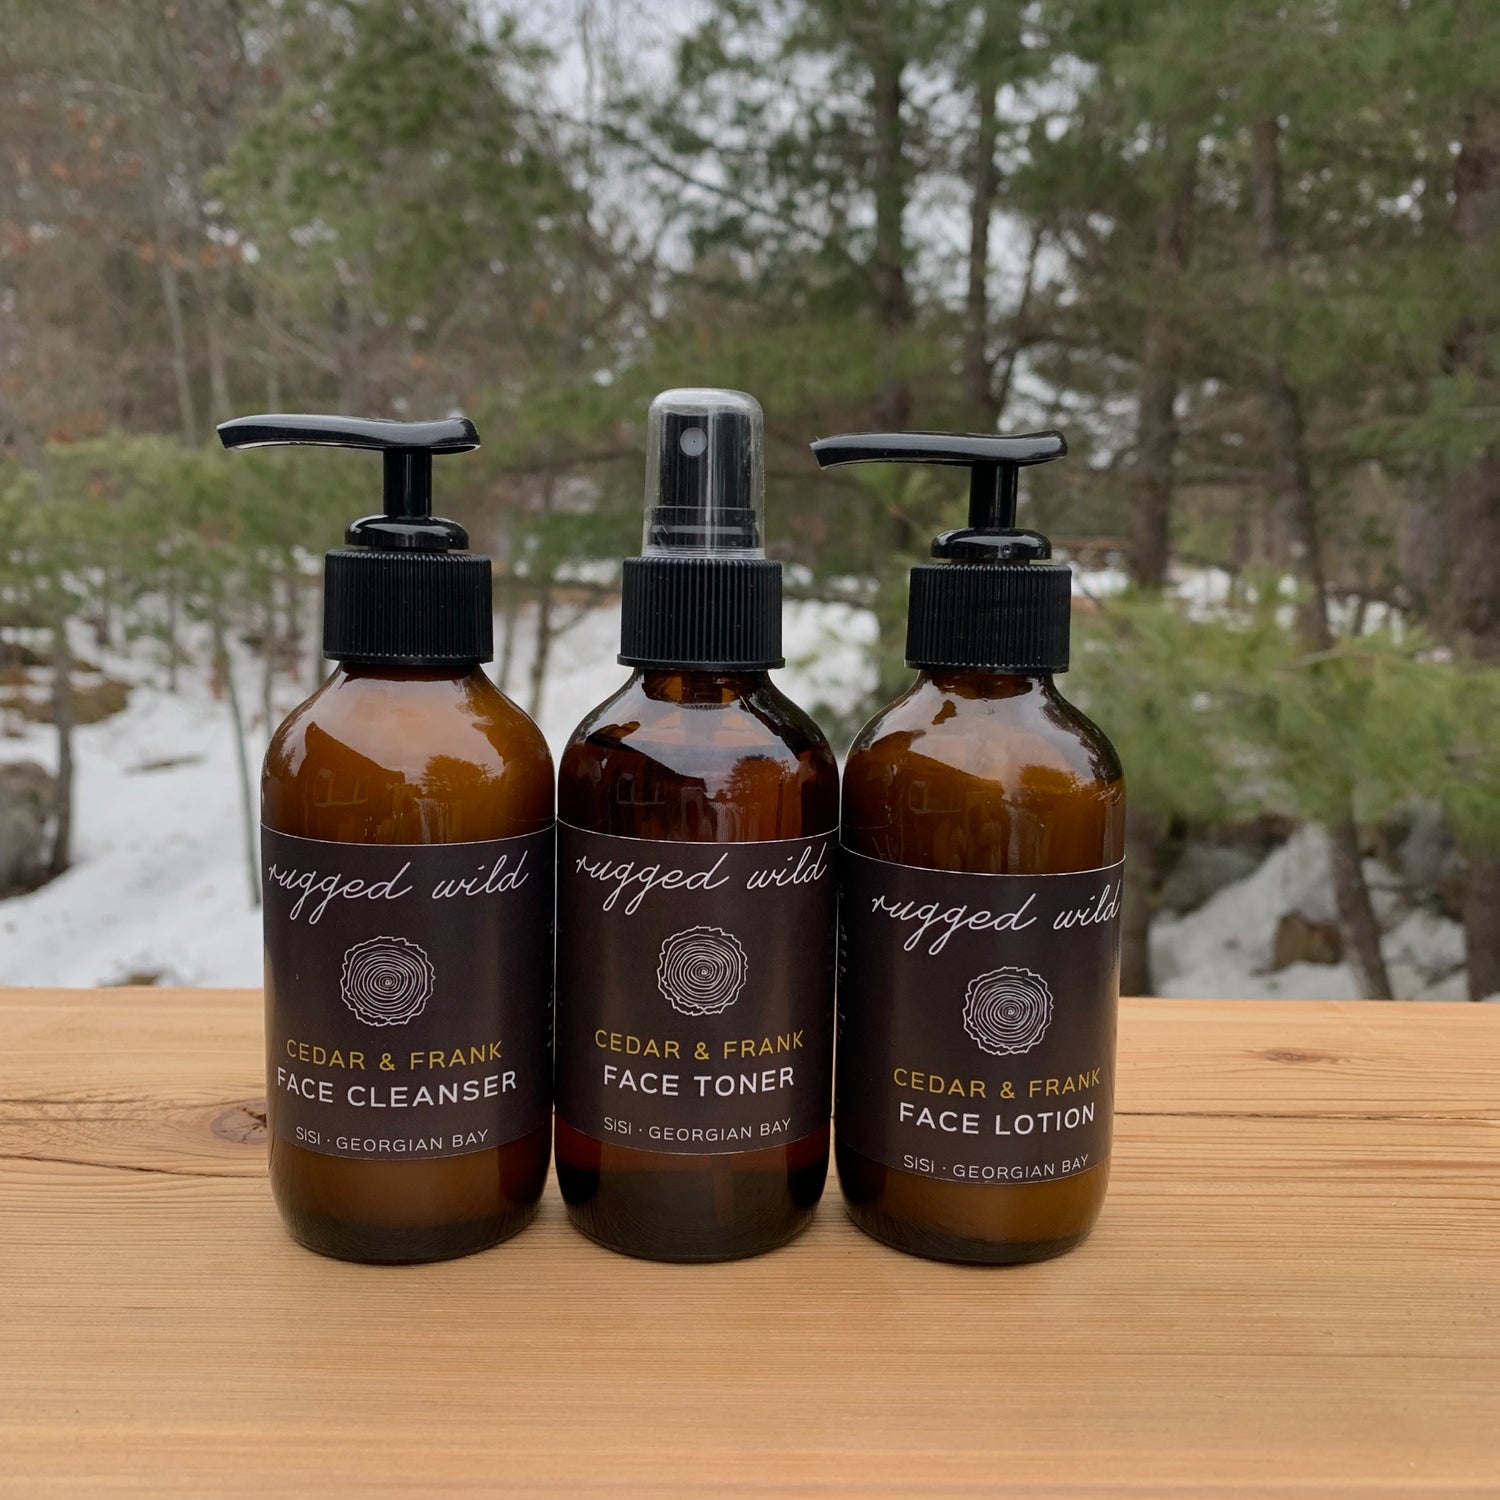 Natural face care for him - natural skincare products - SiSi Georgian Bay  northern ontario "rugged wild" face care trio set on a wooden table outside in nature with evergreen trees and snow covered ground in the background